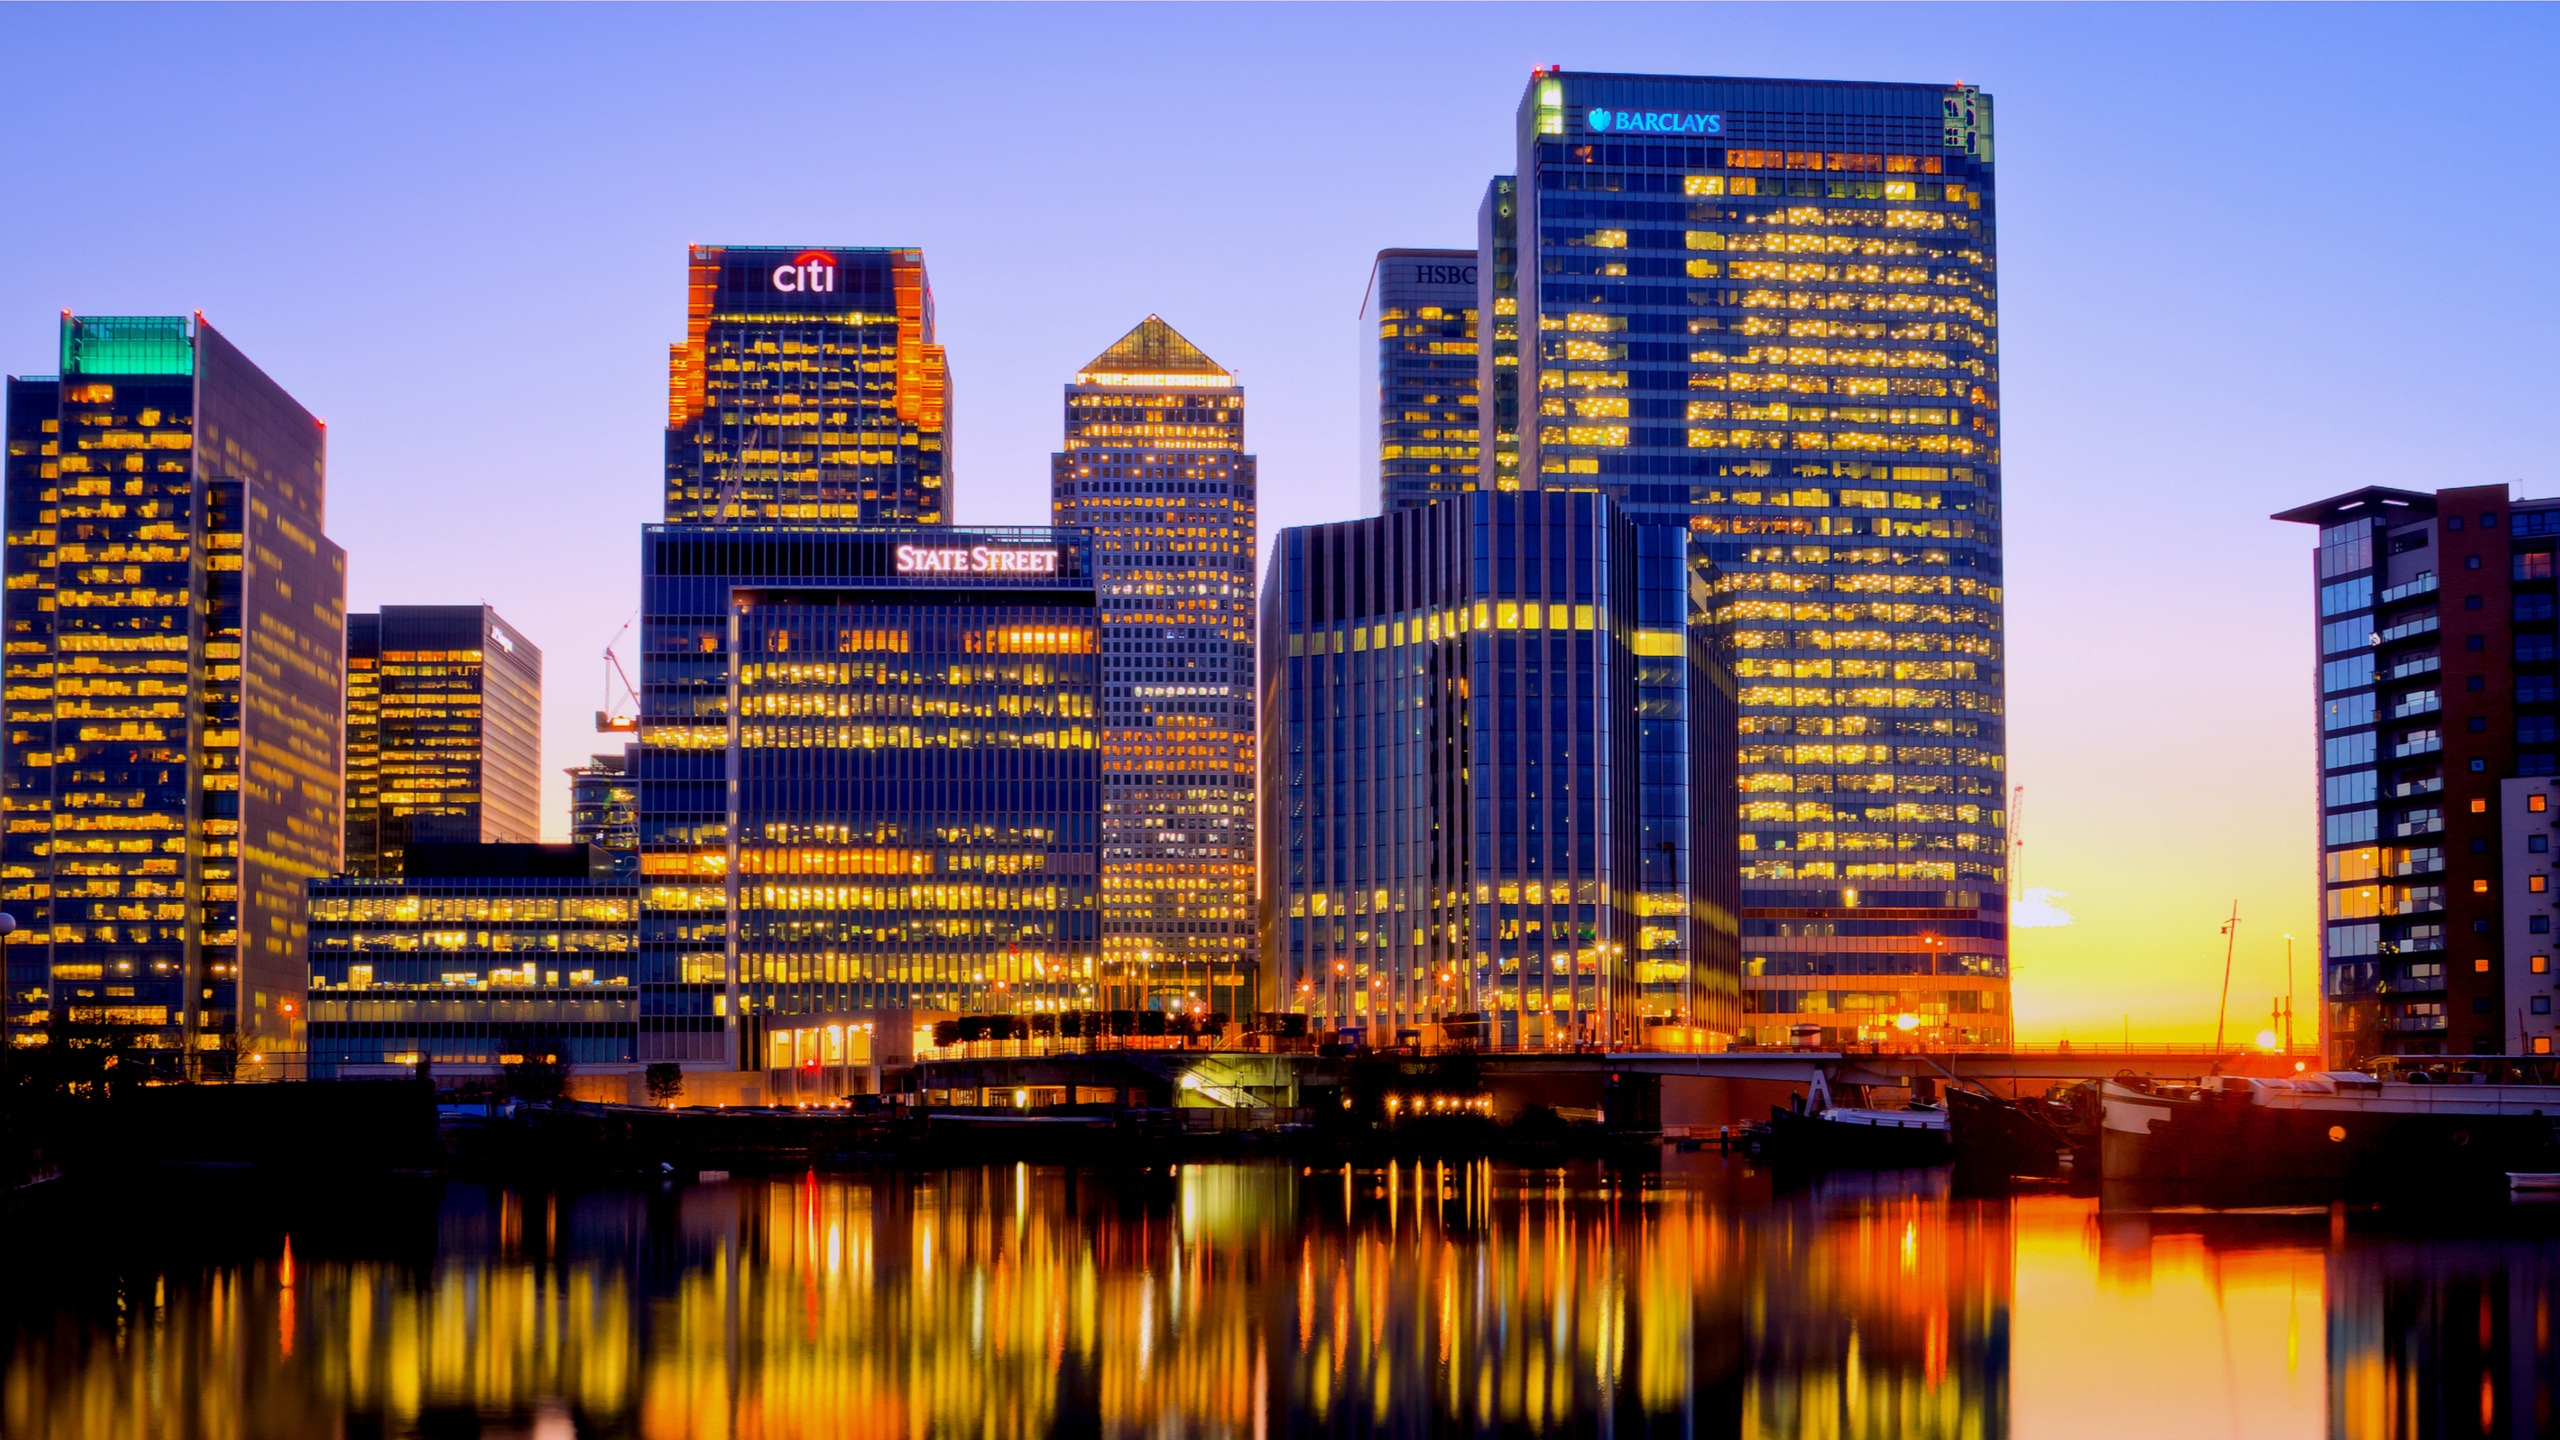 London Canary Wharf for 2560x1440 HDTV resolution